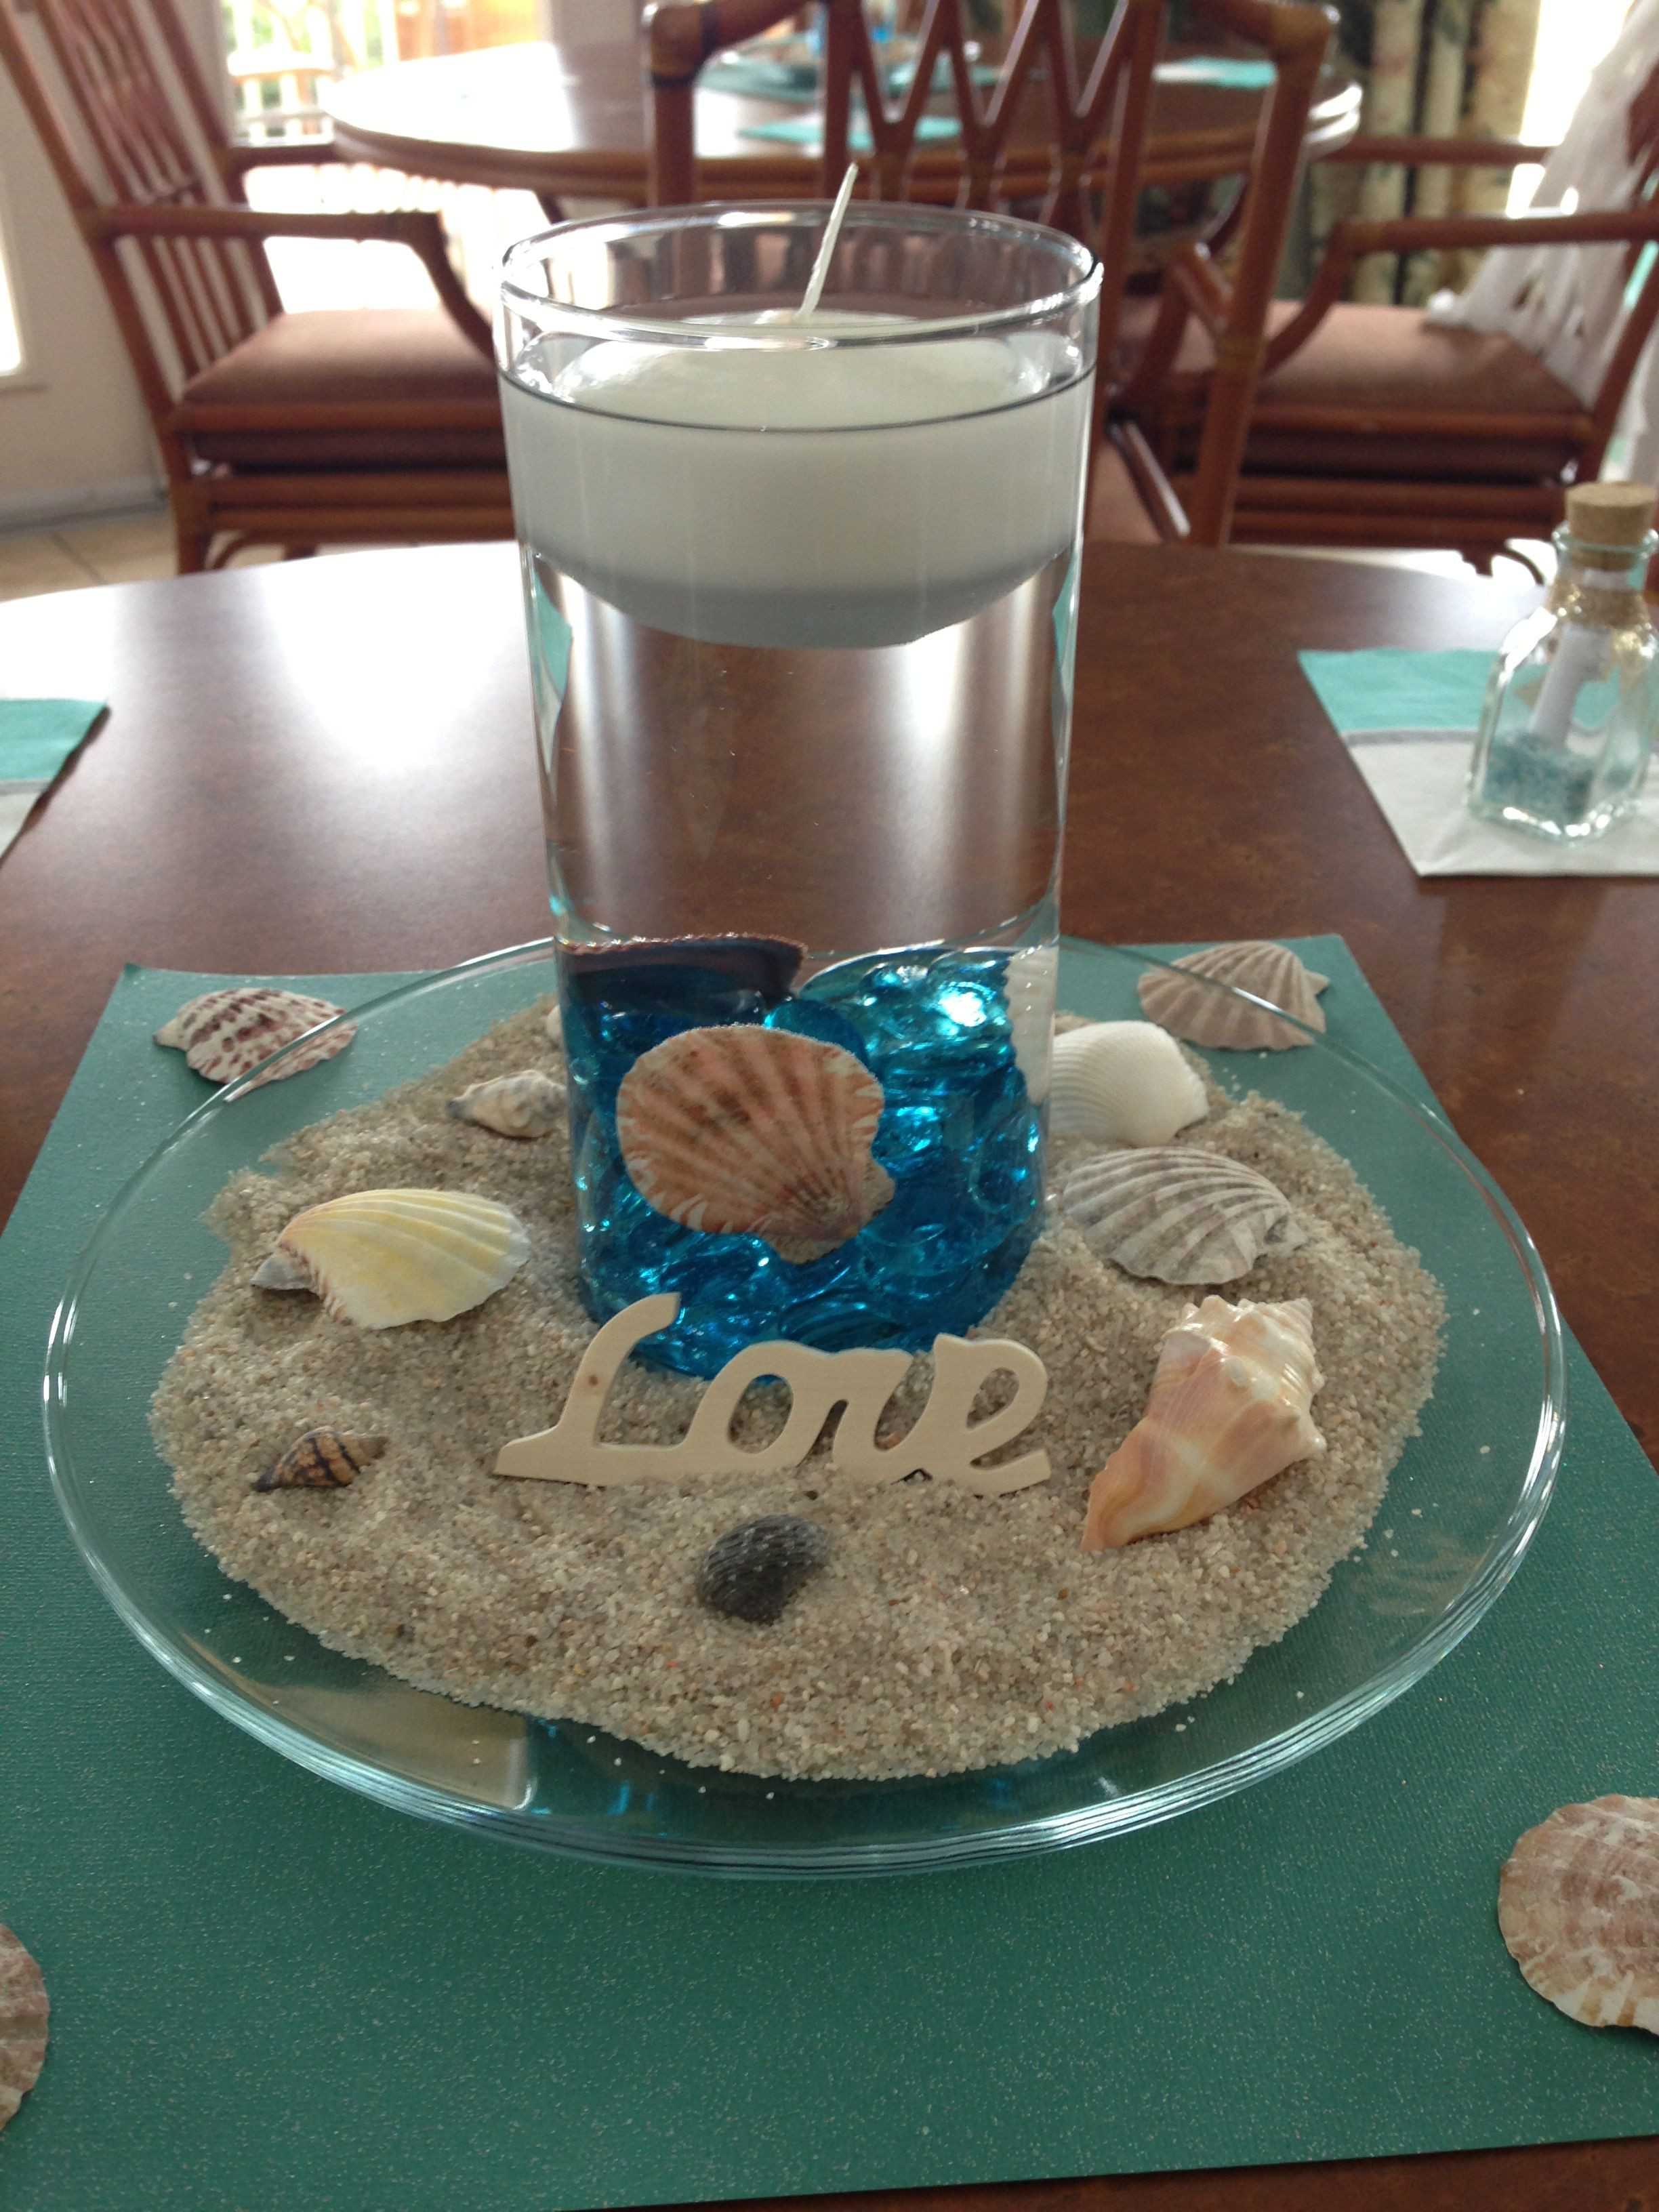 Centerpiece Ideas For Beach Theme Party
 Roxie we can totally use those vases for this idea